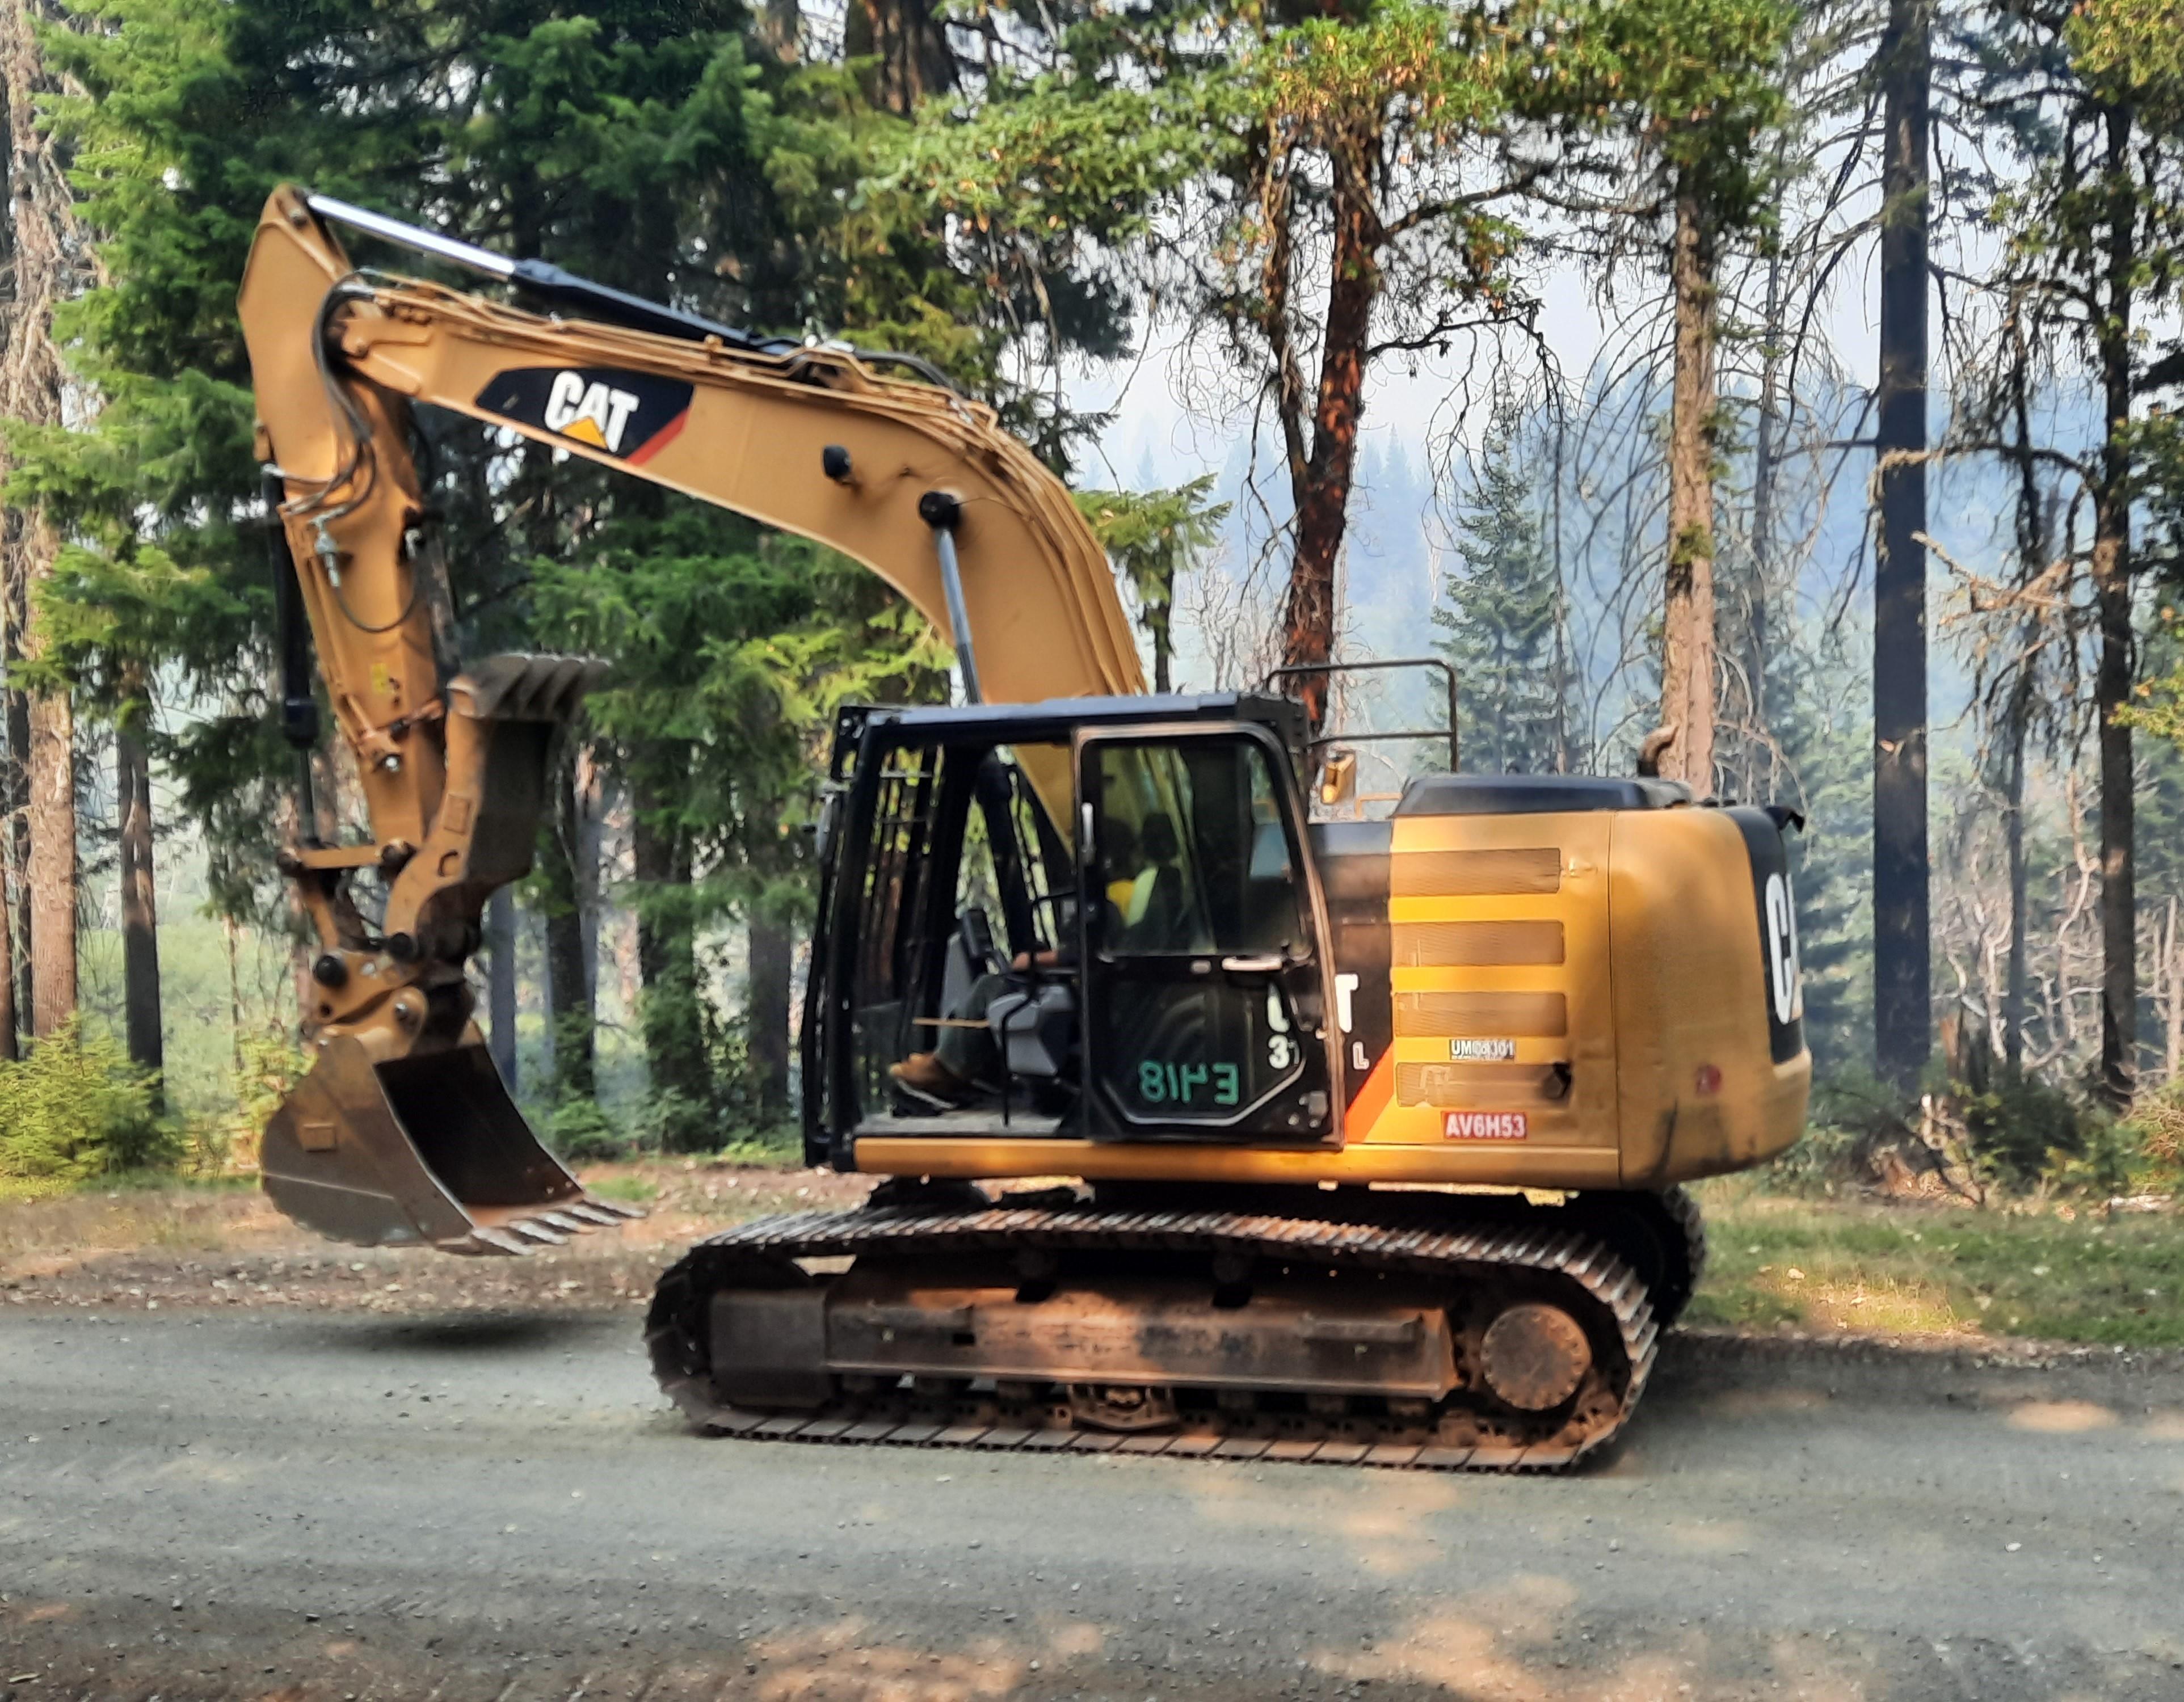 A yellow and black excavator operating on a paved road through the forest